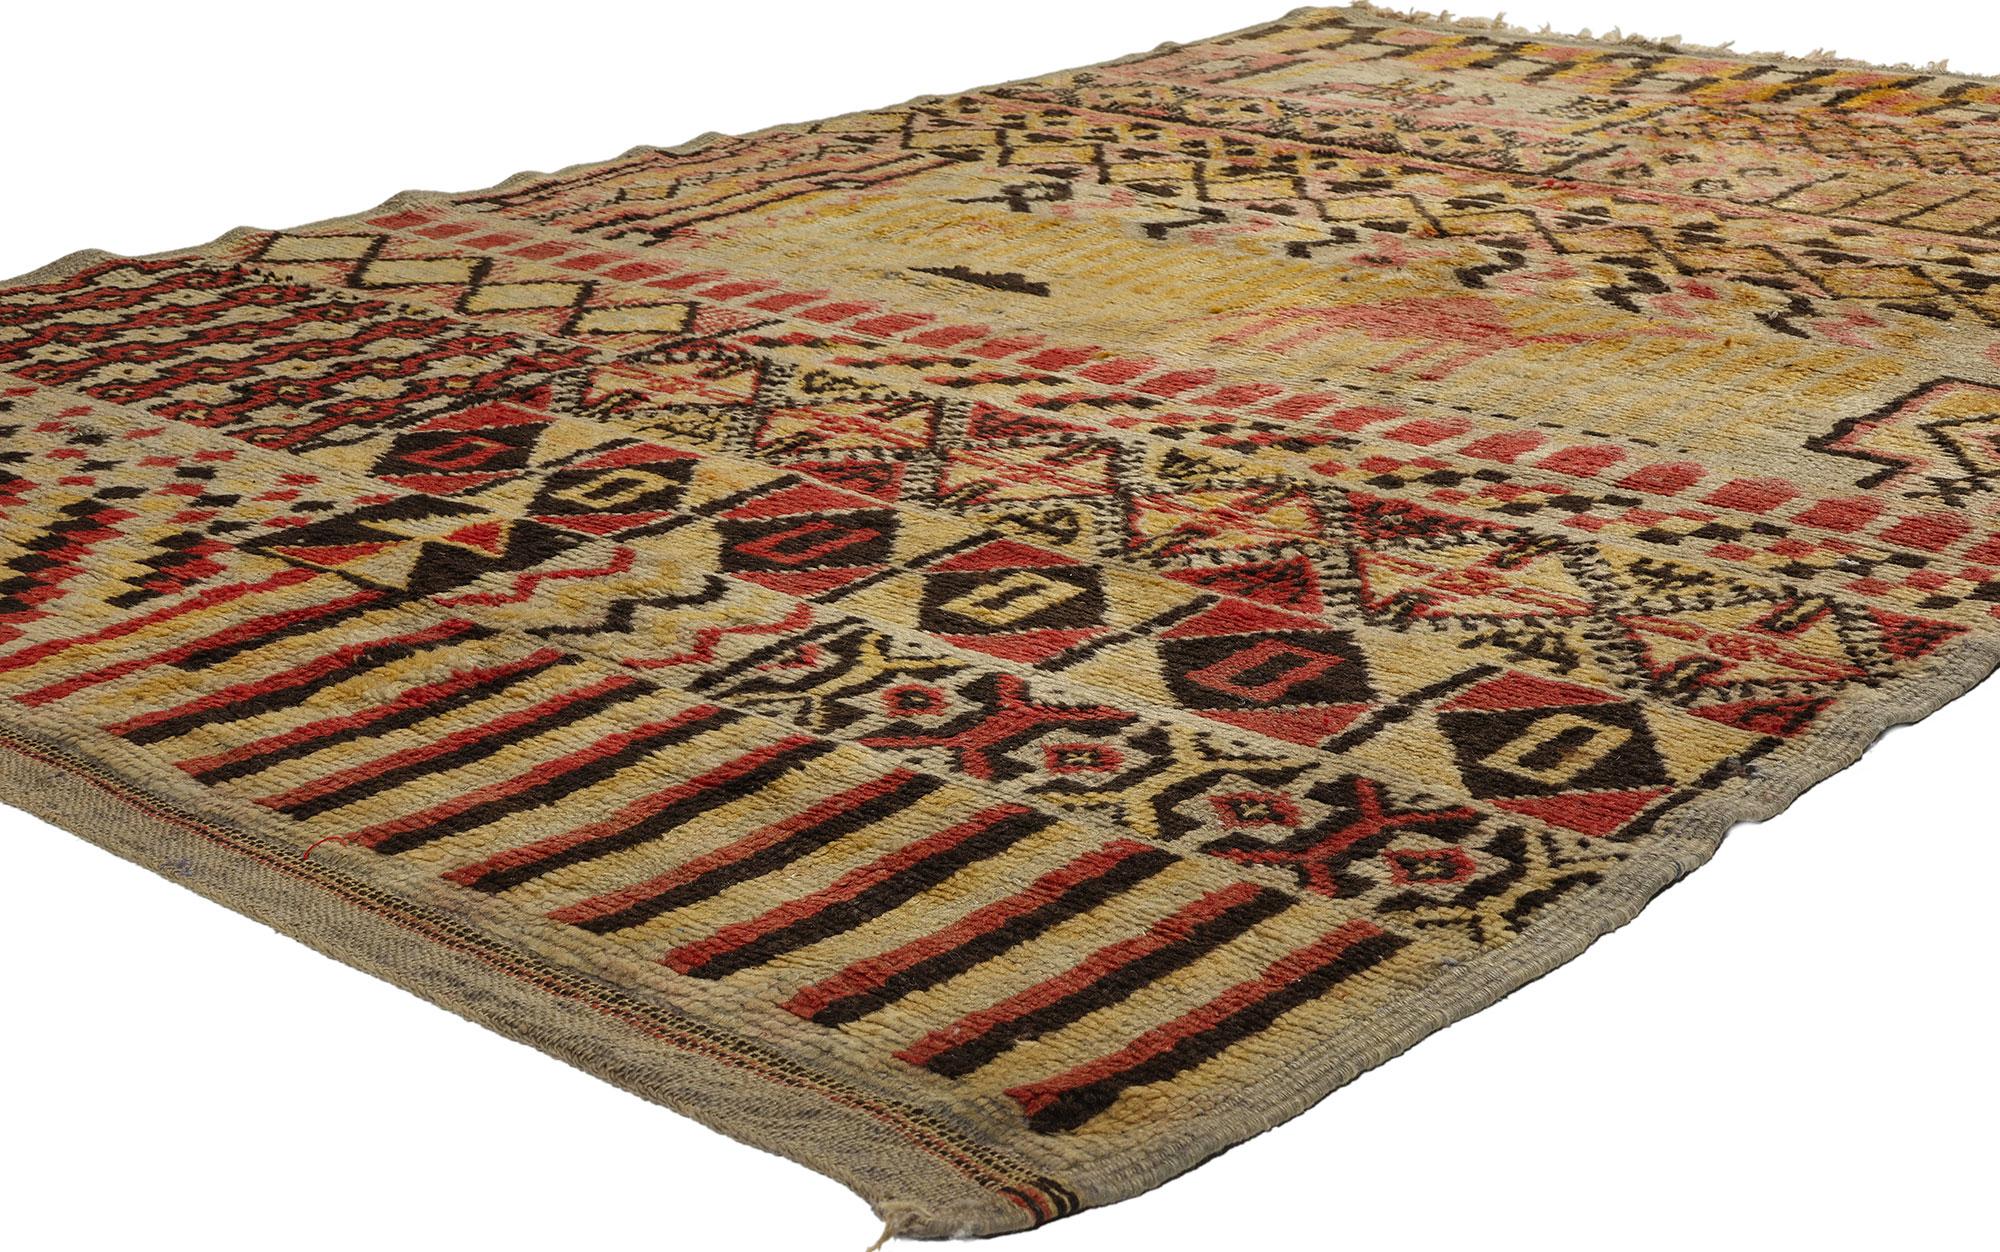 21726 Vintage Boujad Pictorial Moroccan Rug, 05'03 x 08'02. Boujad Moroccan pictorial rugs, originating from Morocco's Boujad region, are a distinct form of rug artistry characterized by their incorporation of figurative elements such as people,